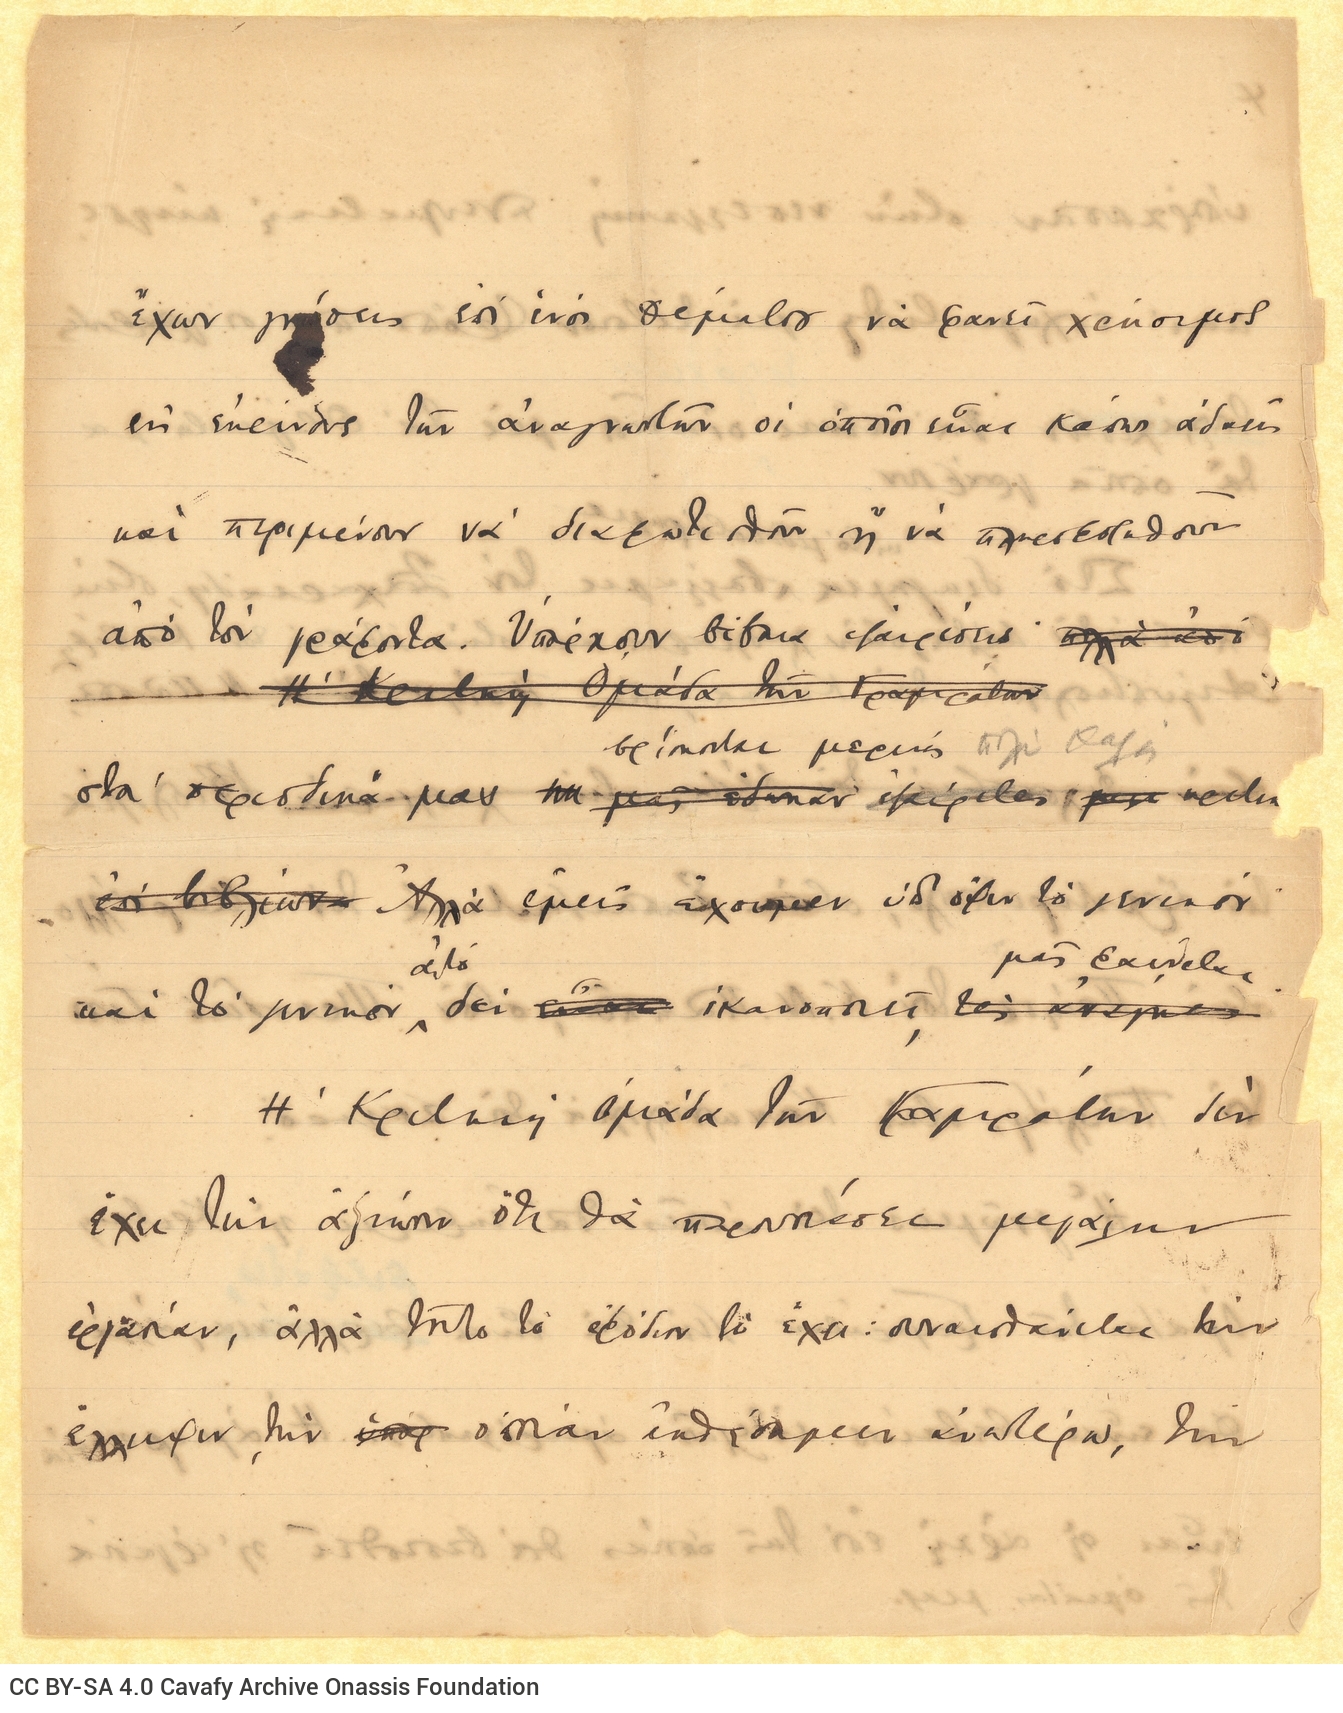 Fragment of a handwritten note by Cavafy on both sides of two ruled sheets, numbered 4 and 5. Mention of the "Group of cri